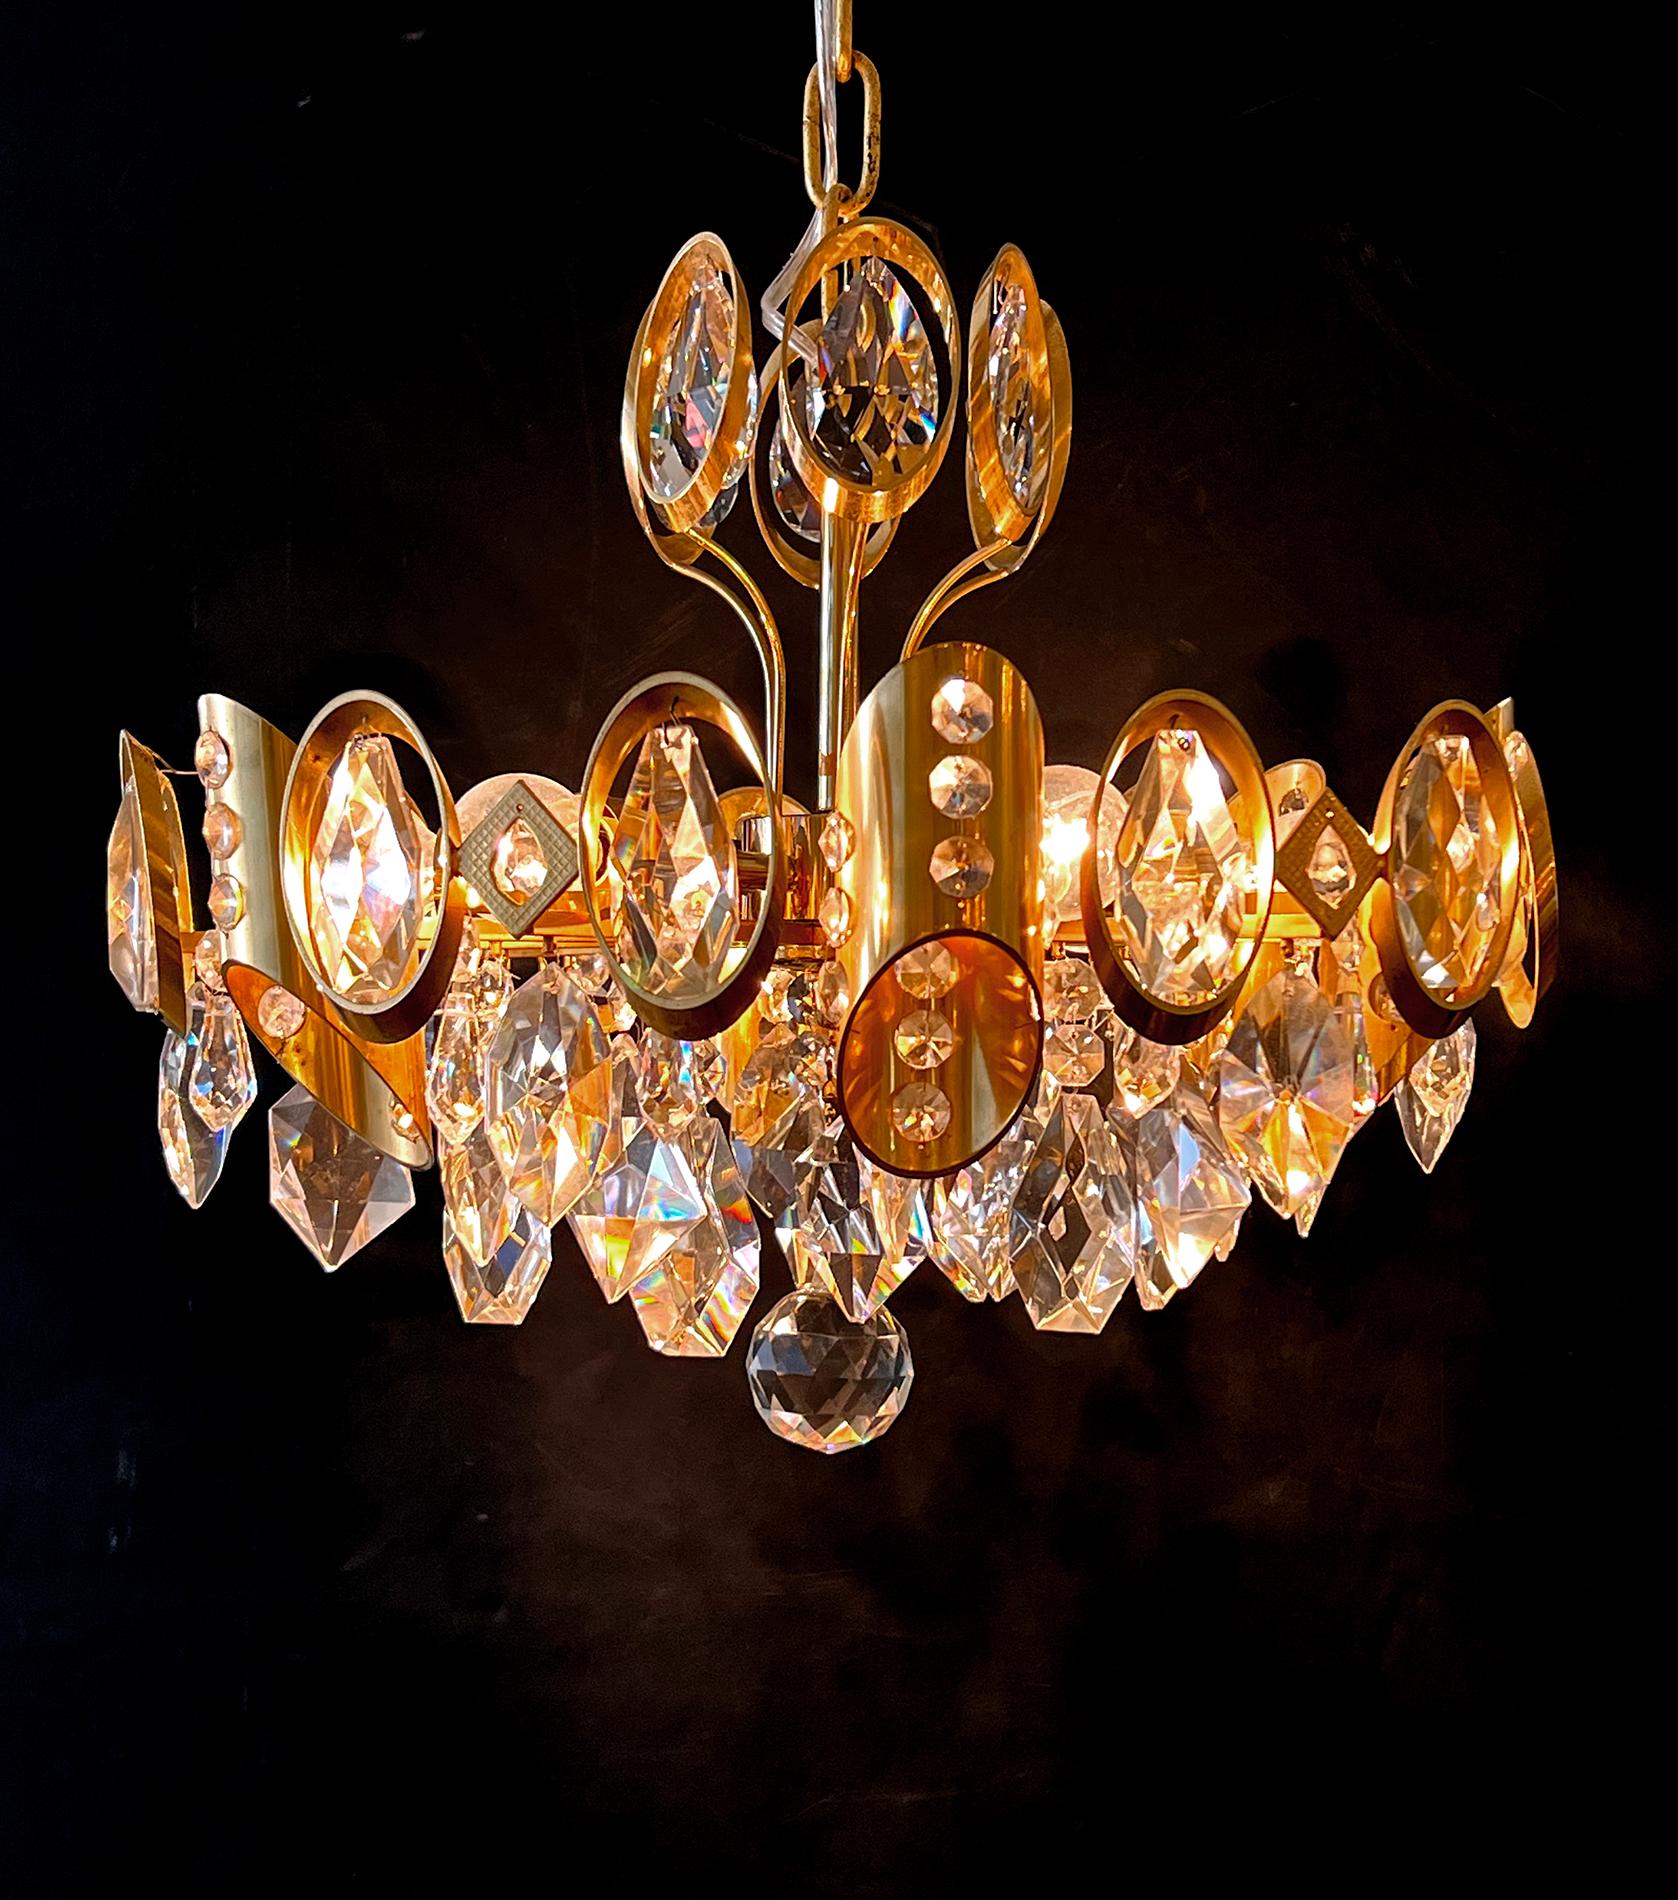 this stylish Hollywood Regency gilt-brass and crystal pendant light fitted with over-scaled round faceted crystal elements; great statement piece for a powder room, small hallway or dressing room